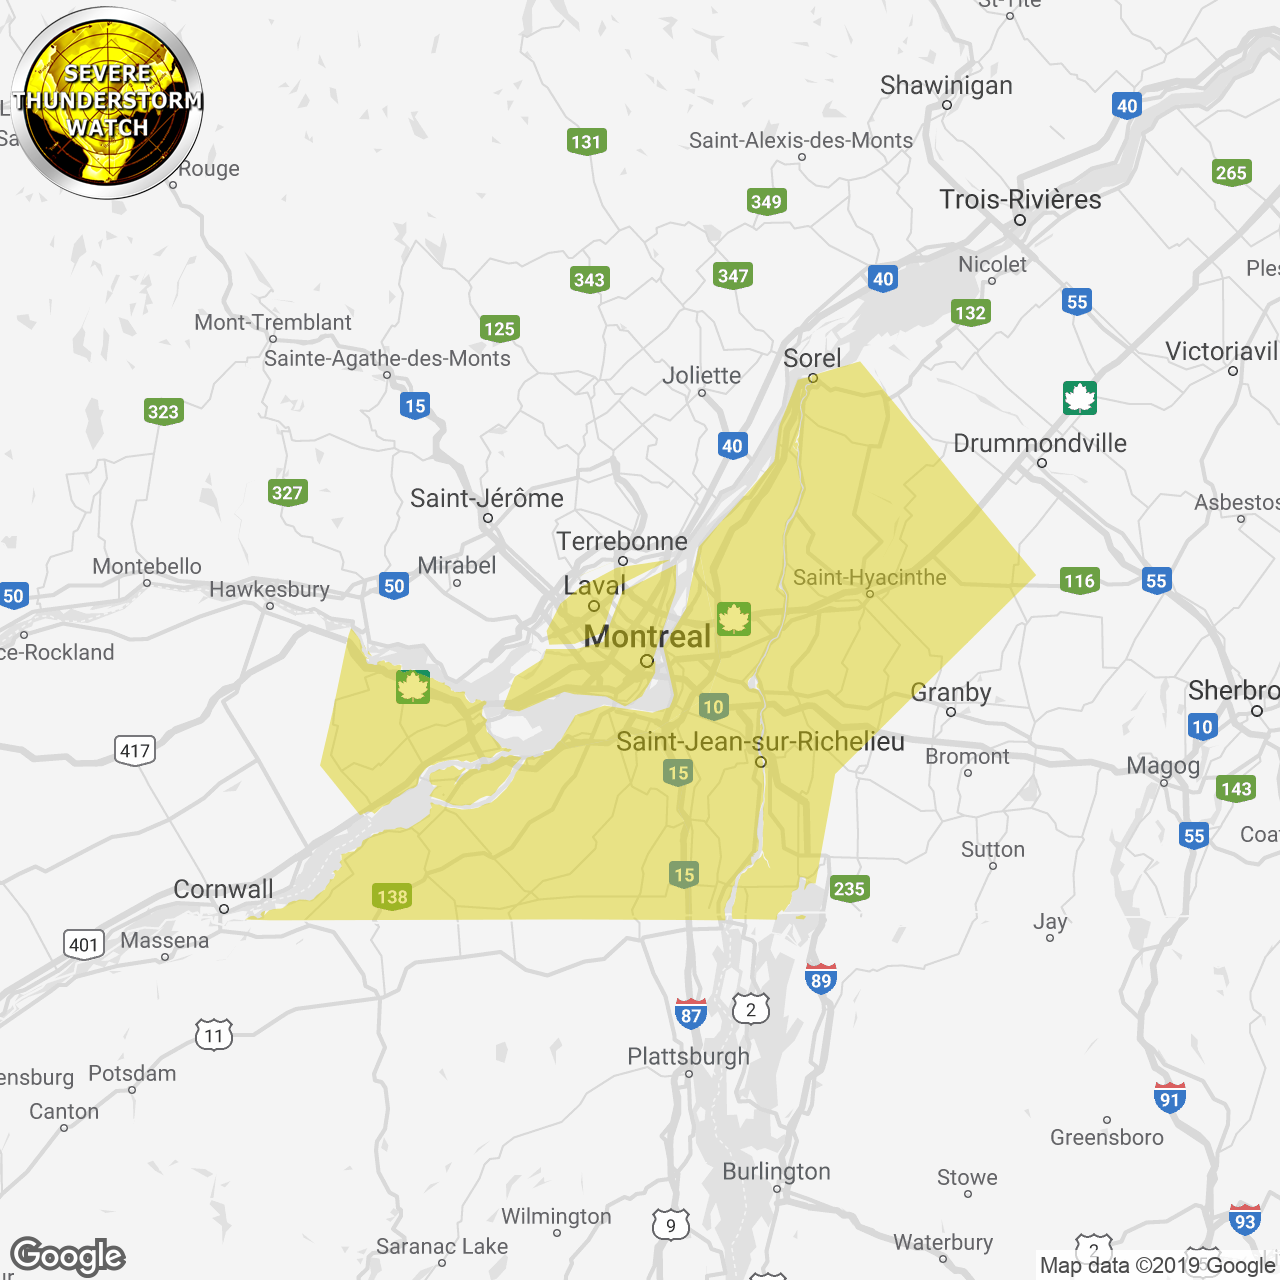 download severe thunderstorm watch